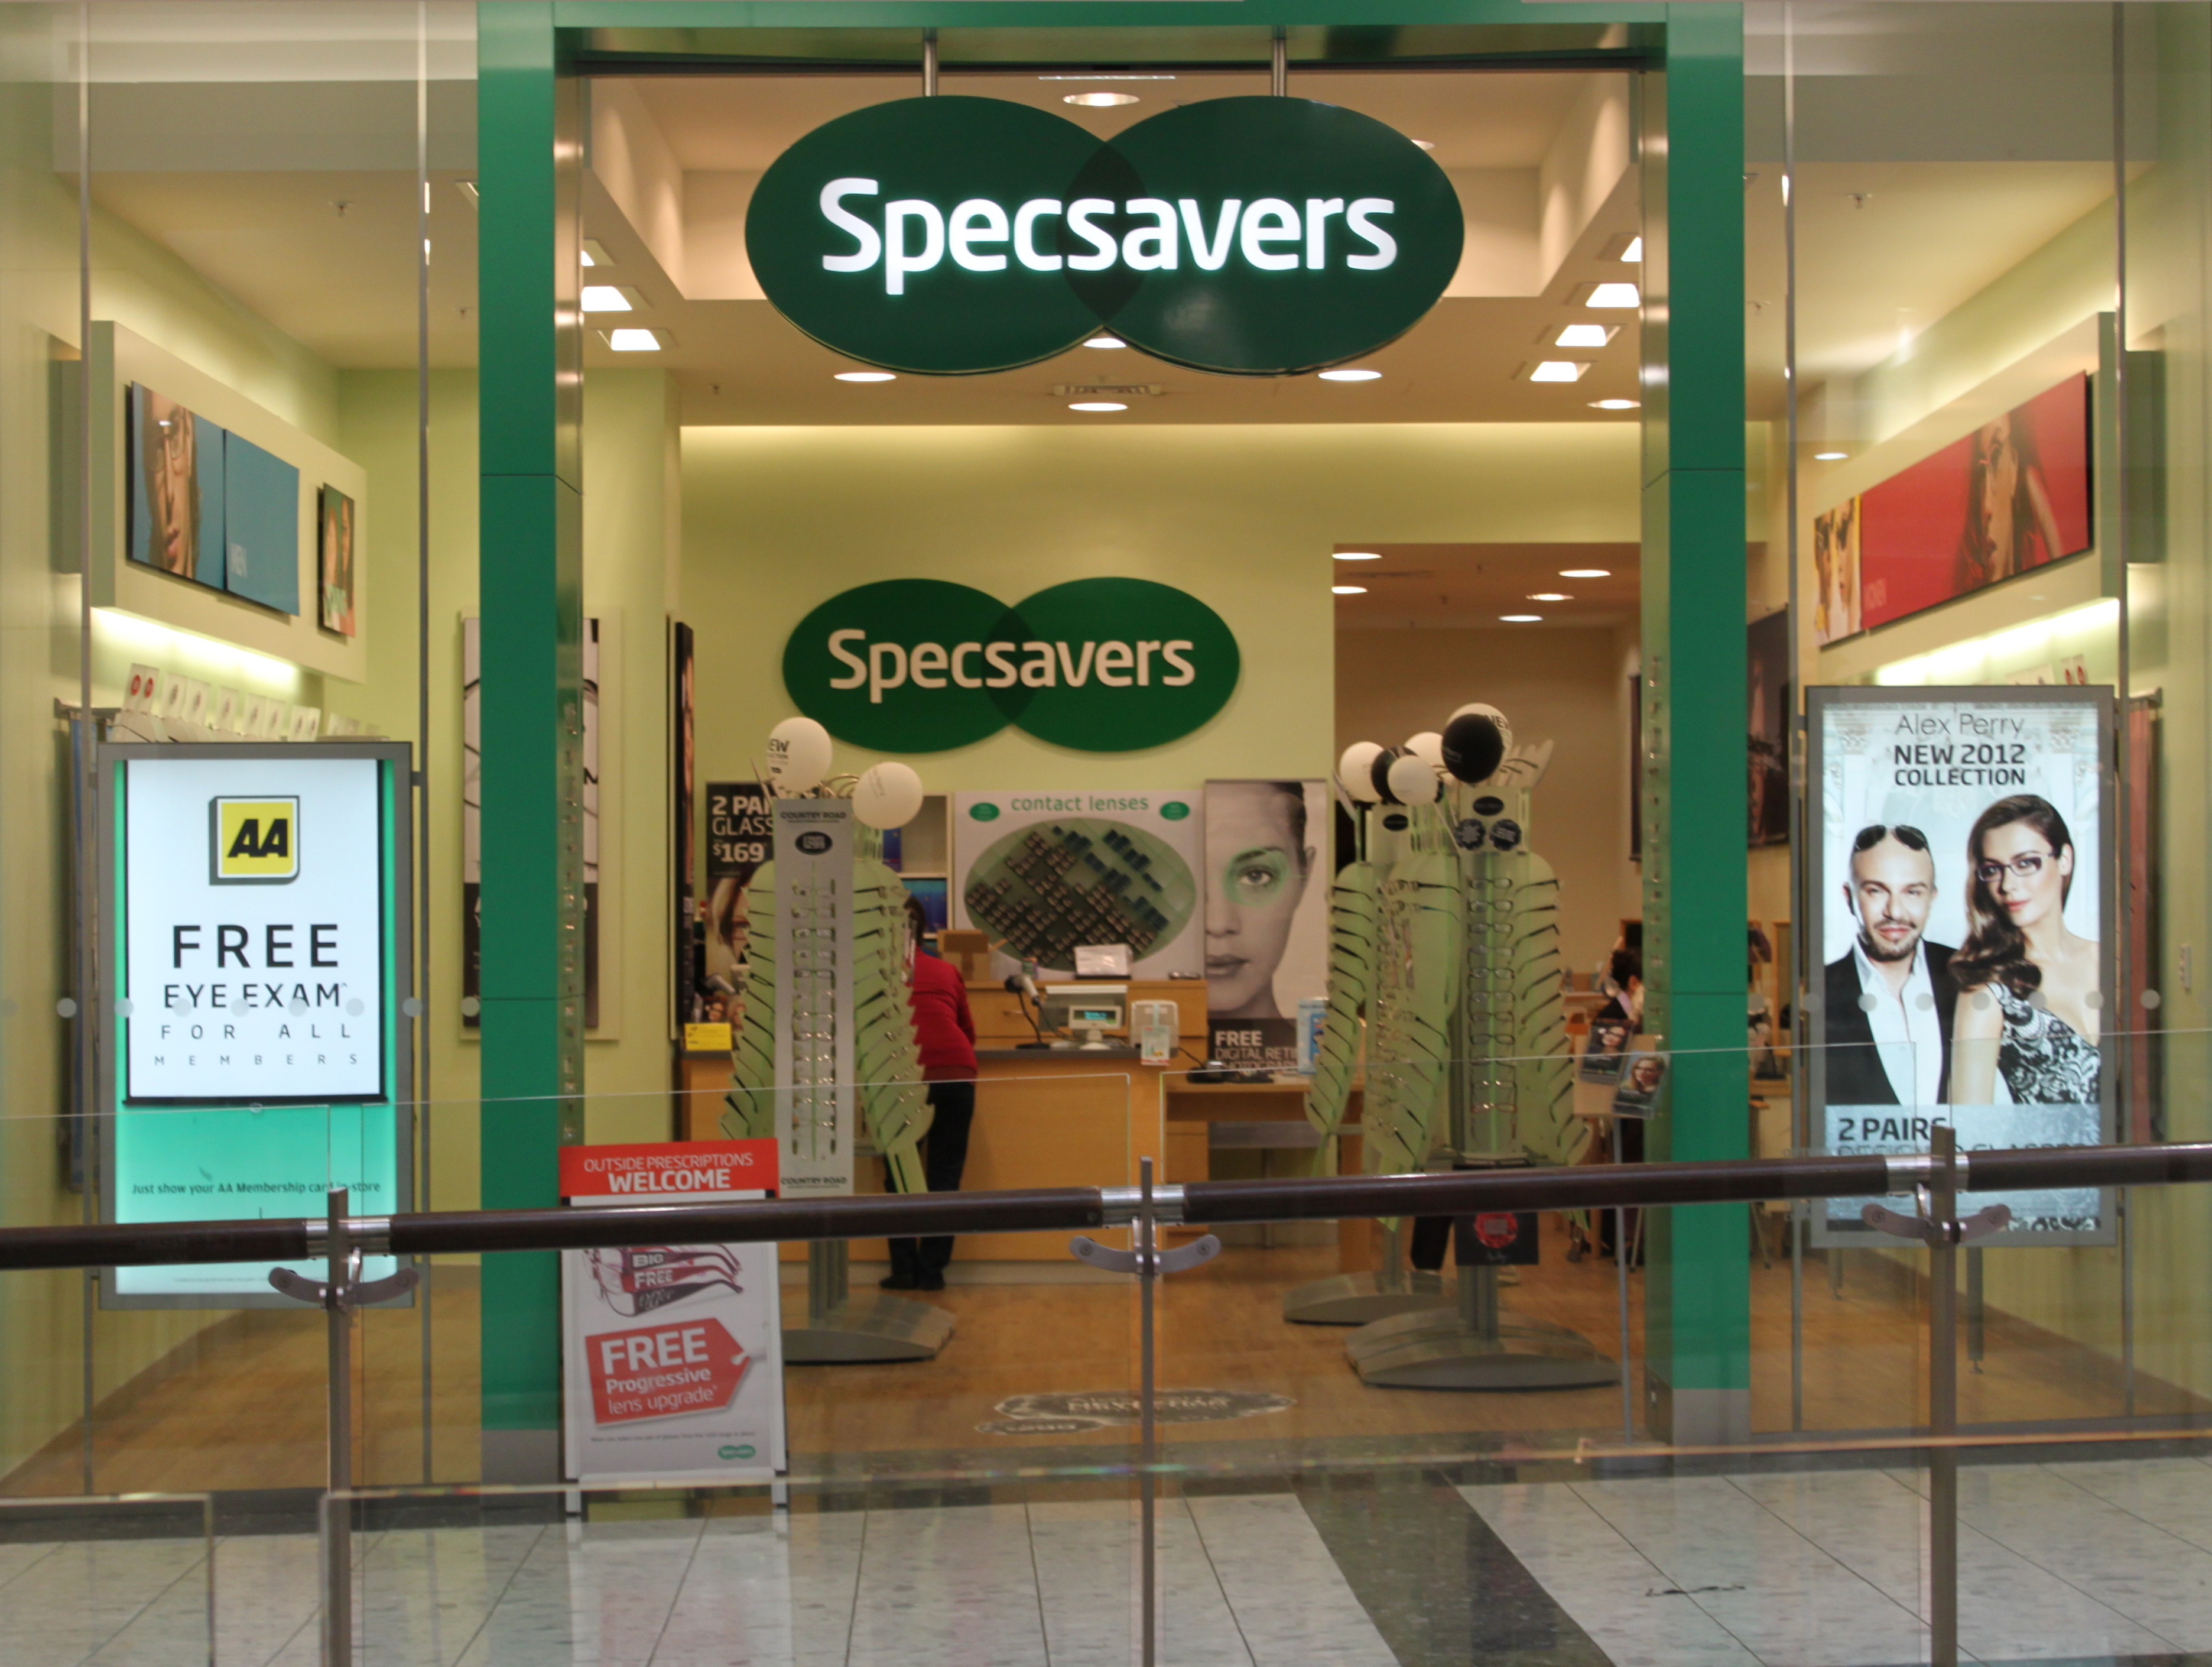 Images Specsavers Optometrists - St Lukes